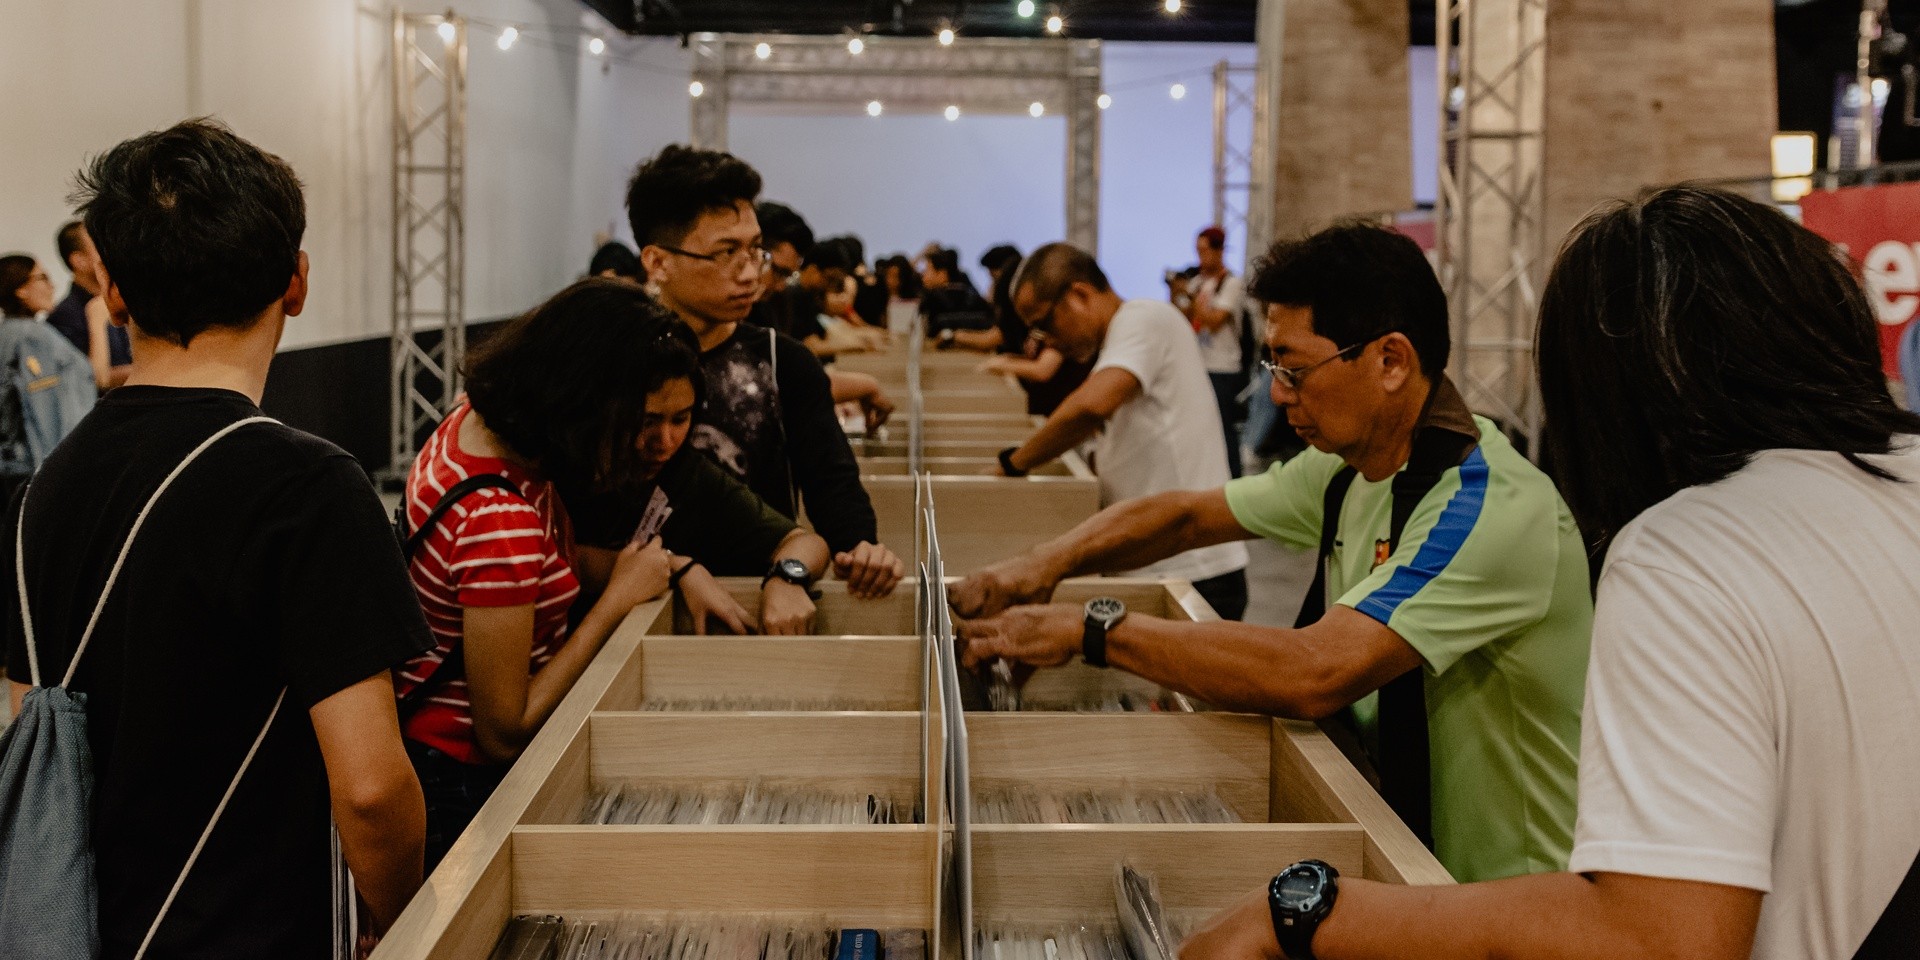 Record Store Day 2019 in the Philippines: Where and how to celebrate